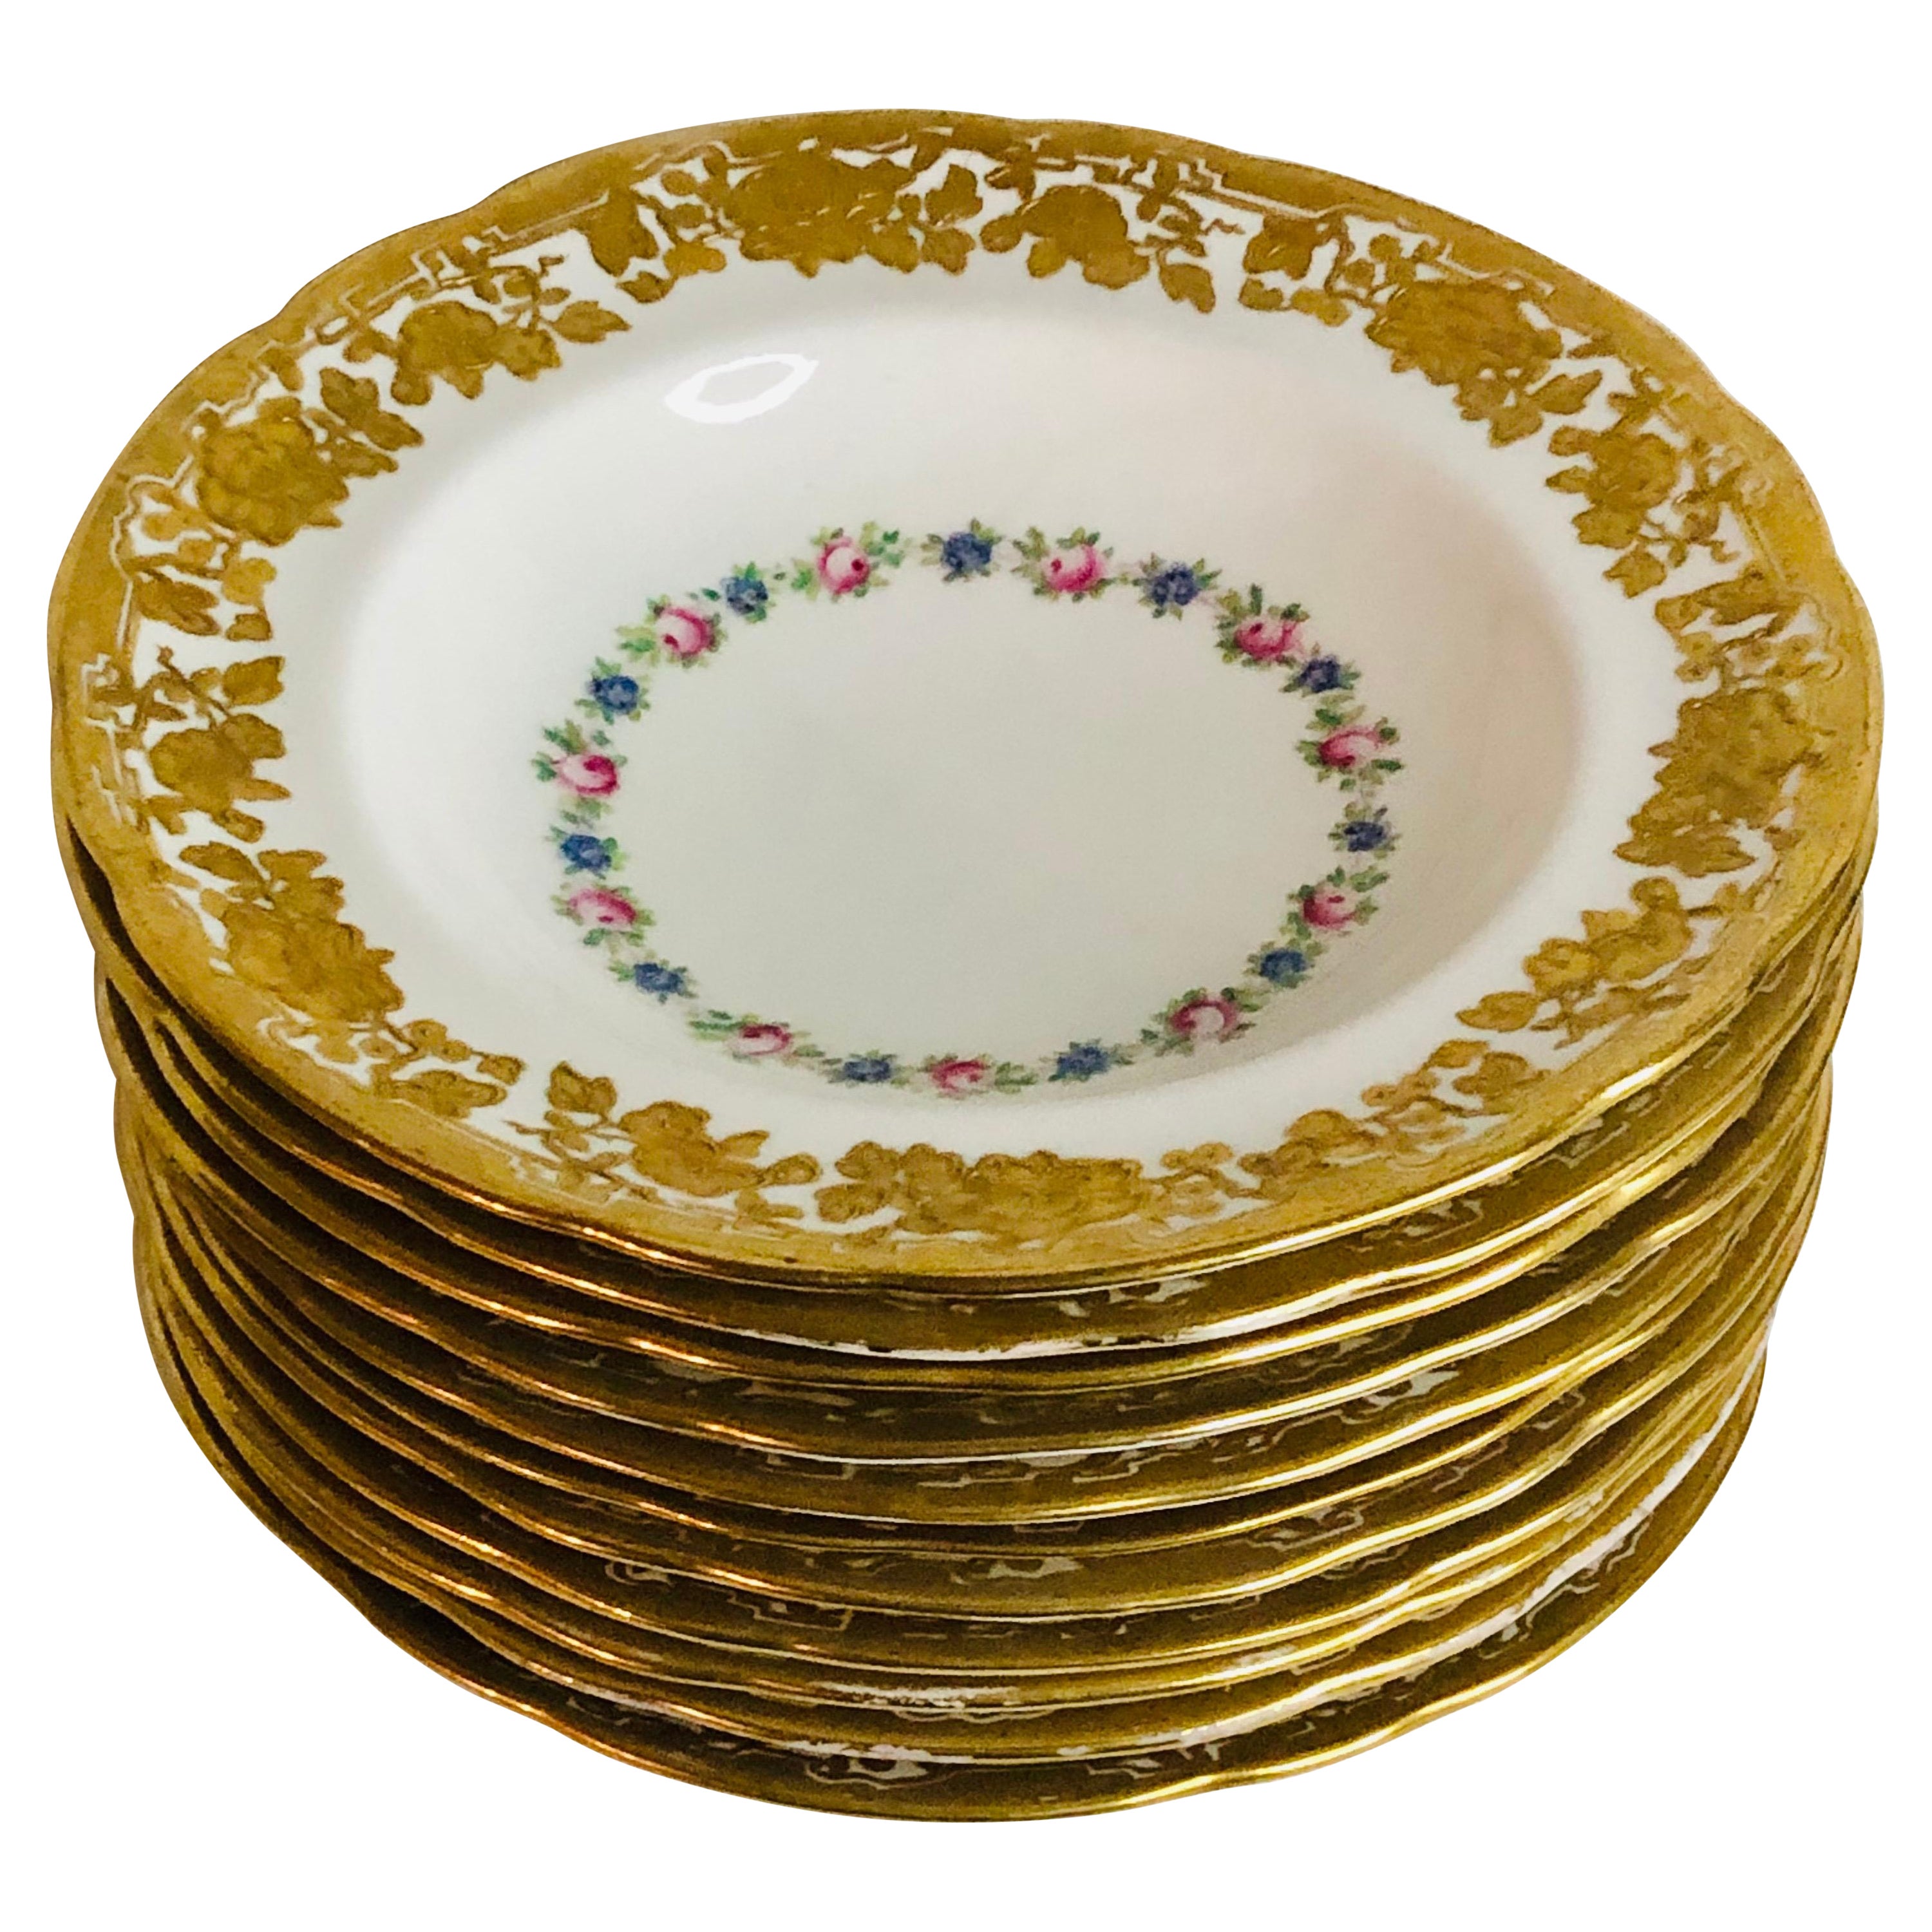 Set of Eleven Hammersley & Co. Wide Rim Soups with Raised Gilded Flowers on Rim For Sale